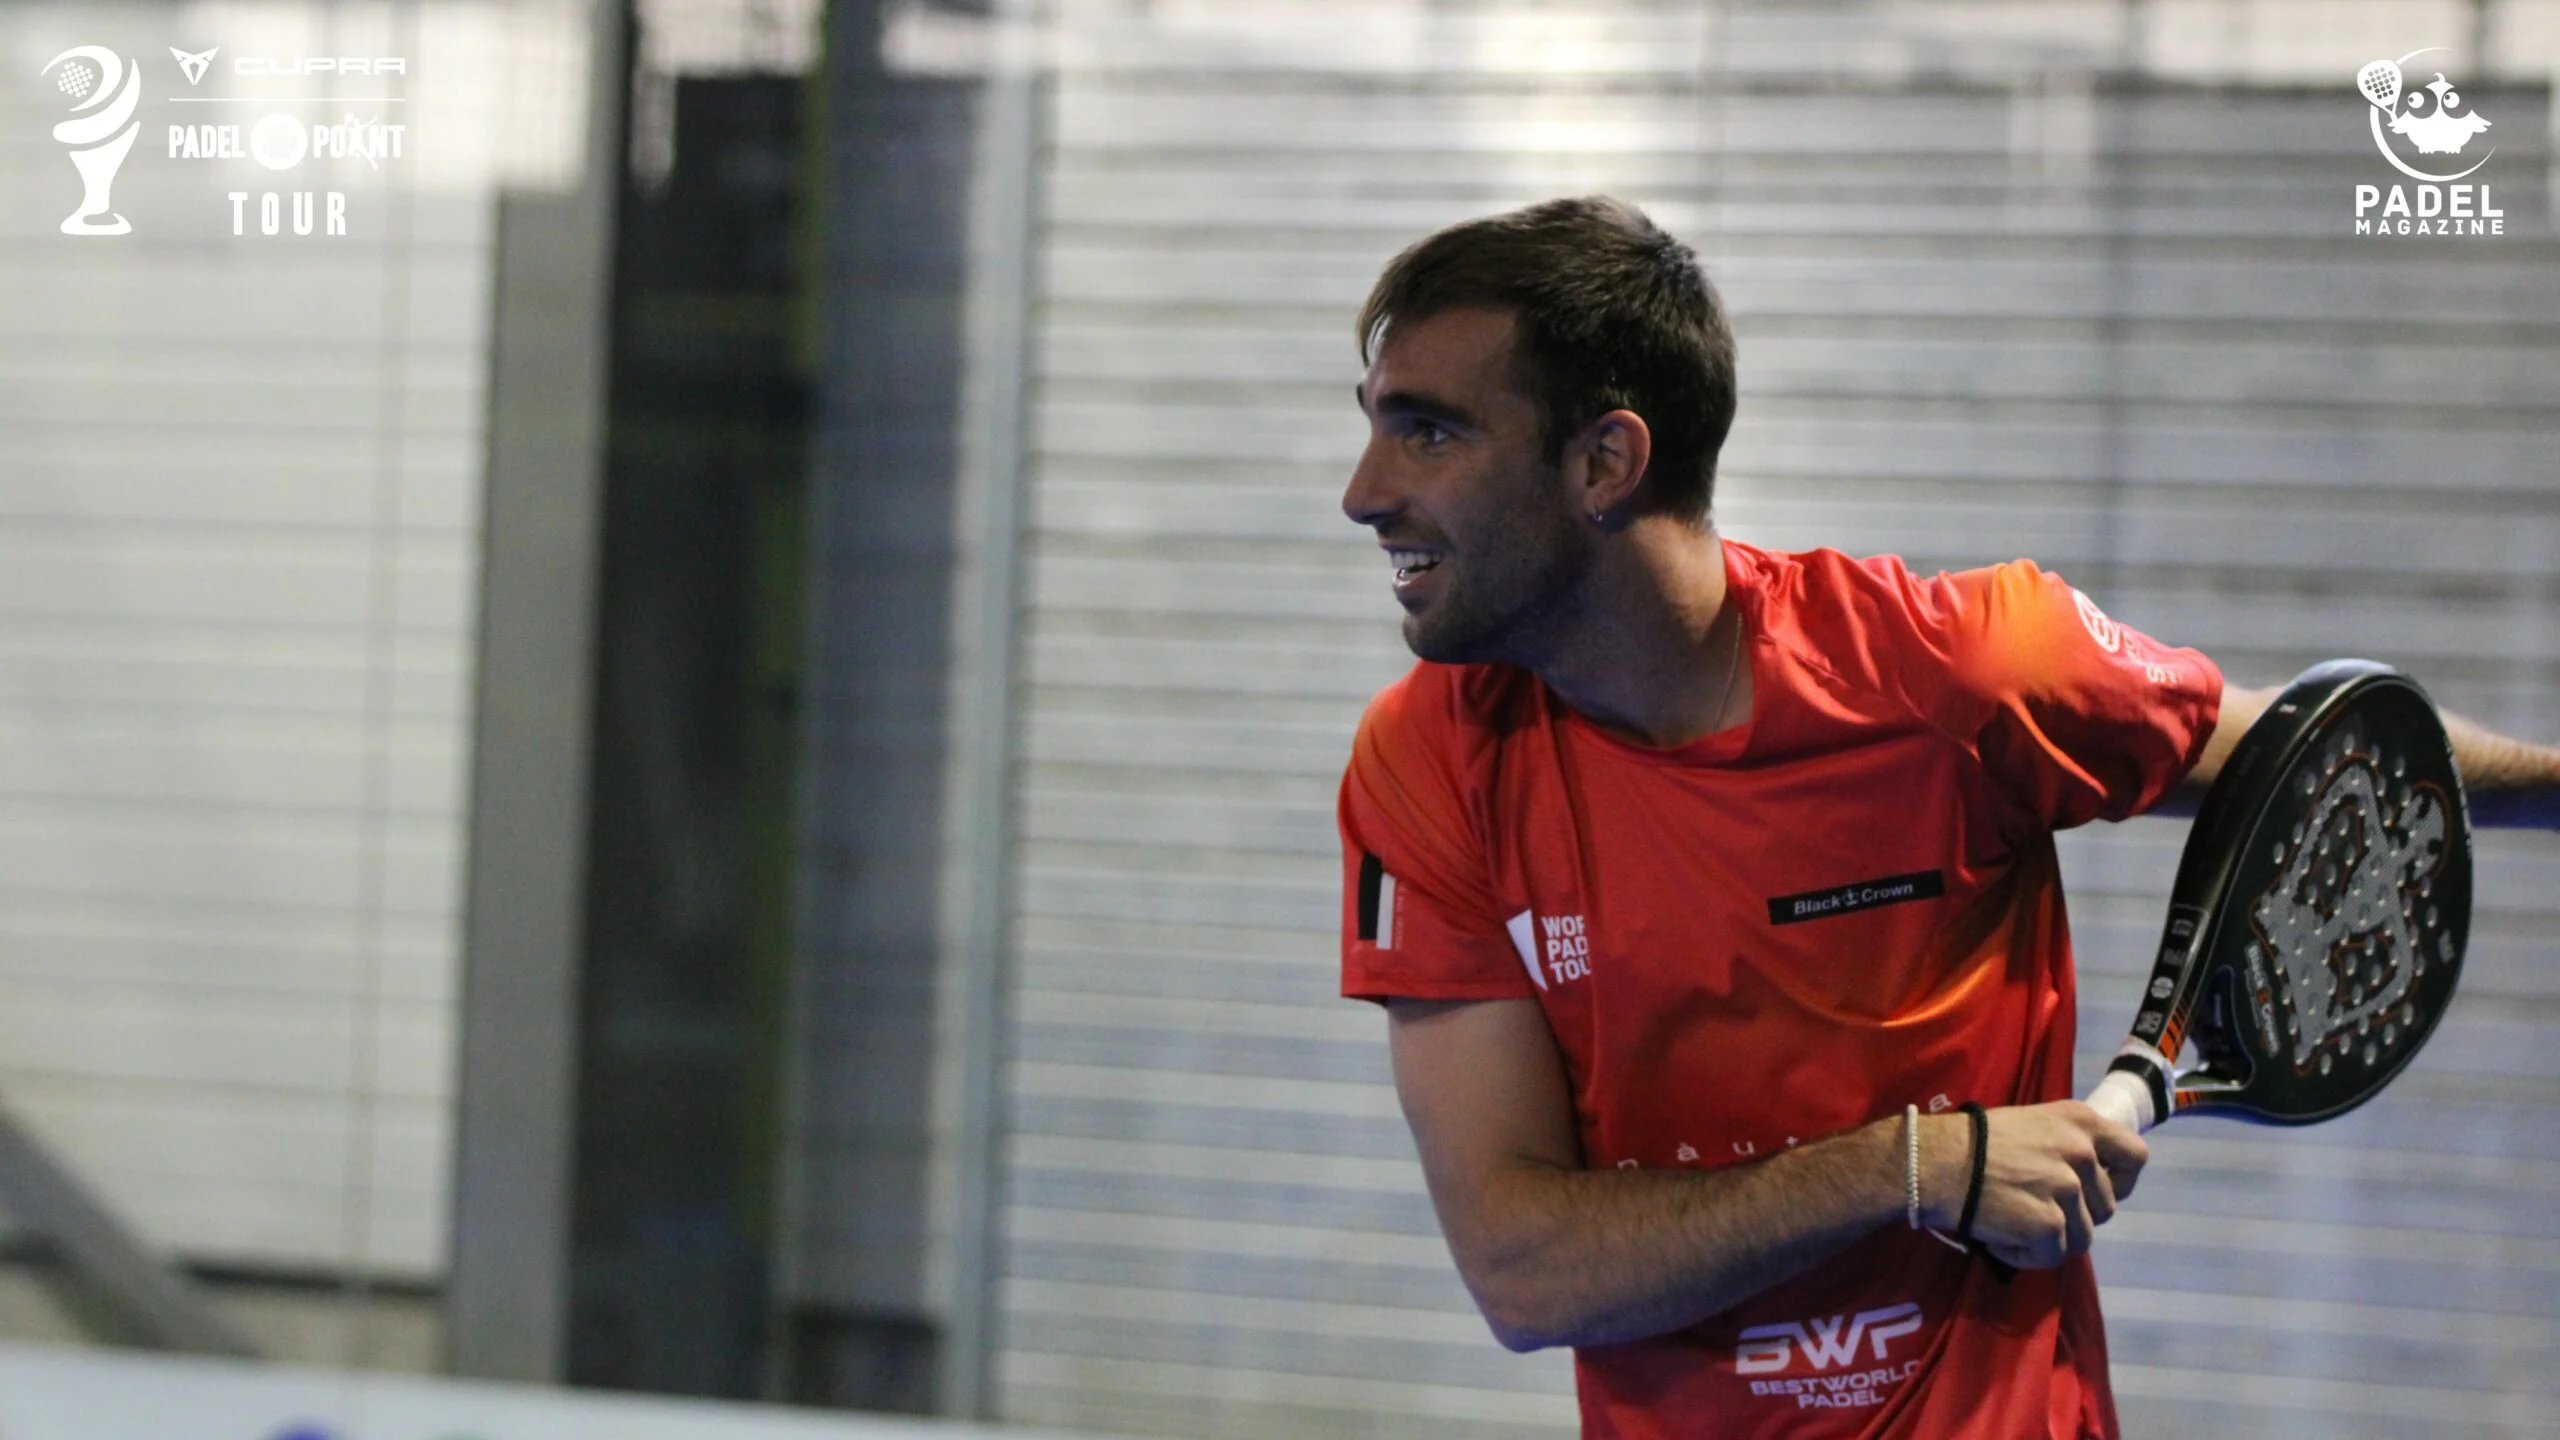 Aitor Garcia: “I don’t know if I’m going to continue on Premier Padel or play A1 Padel"